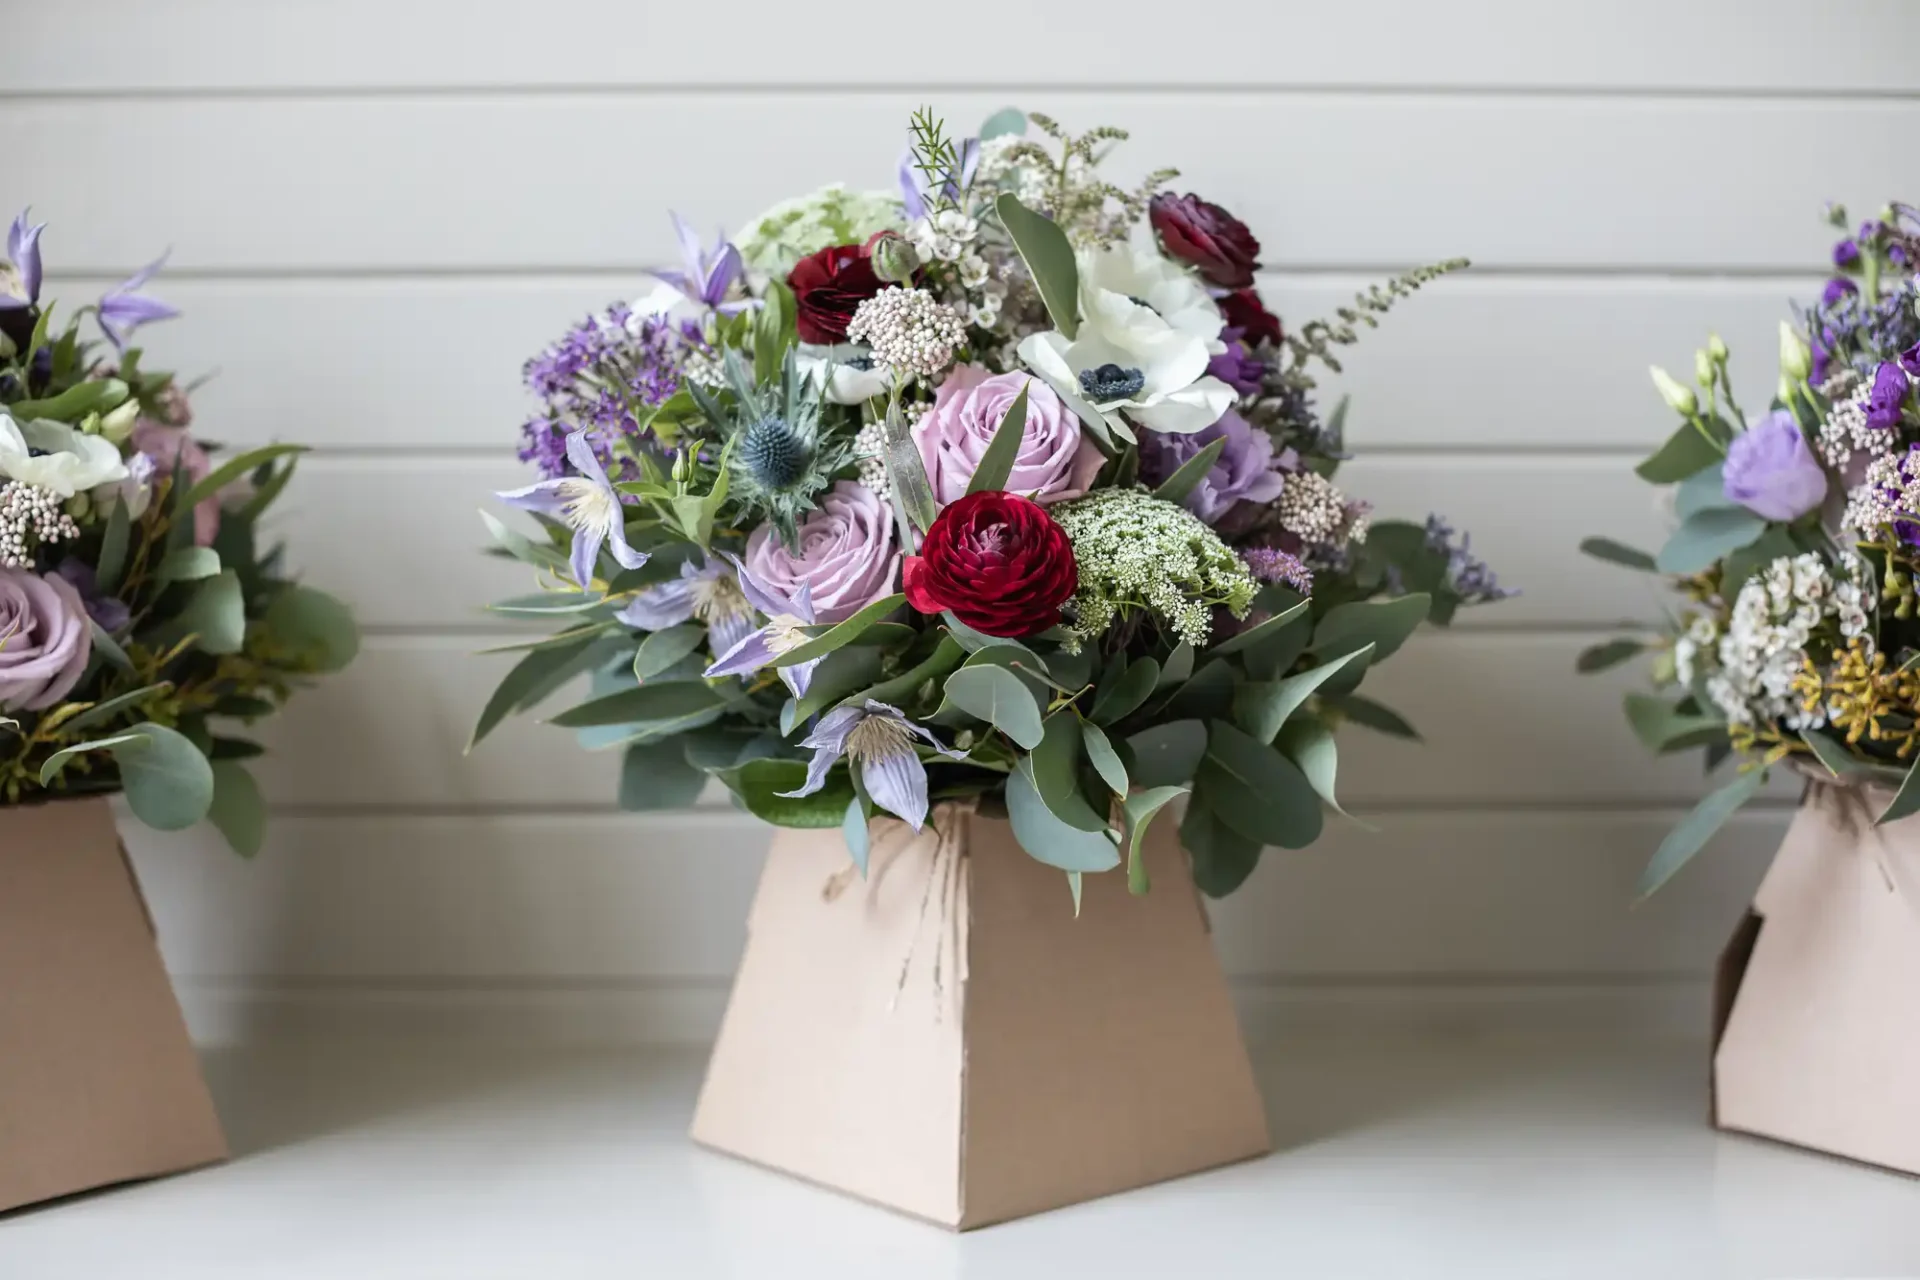 A bouquet of flowers including red, purple, and white blooms with green foliage arranged in a simple brown paper vase, set against a light-colored, horizontal wooden panel background.